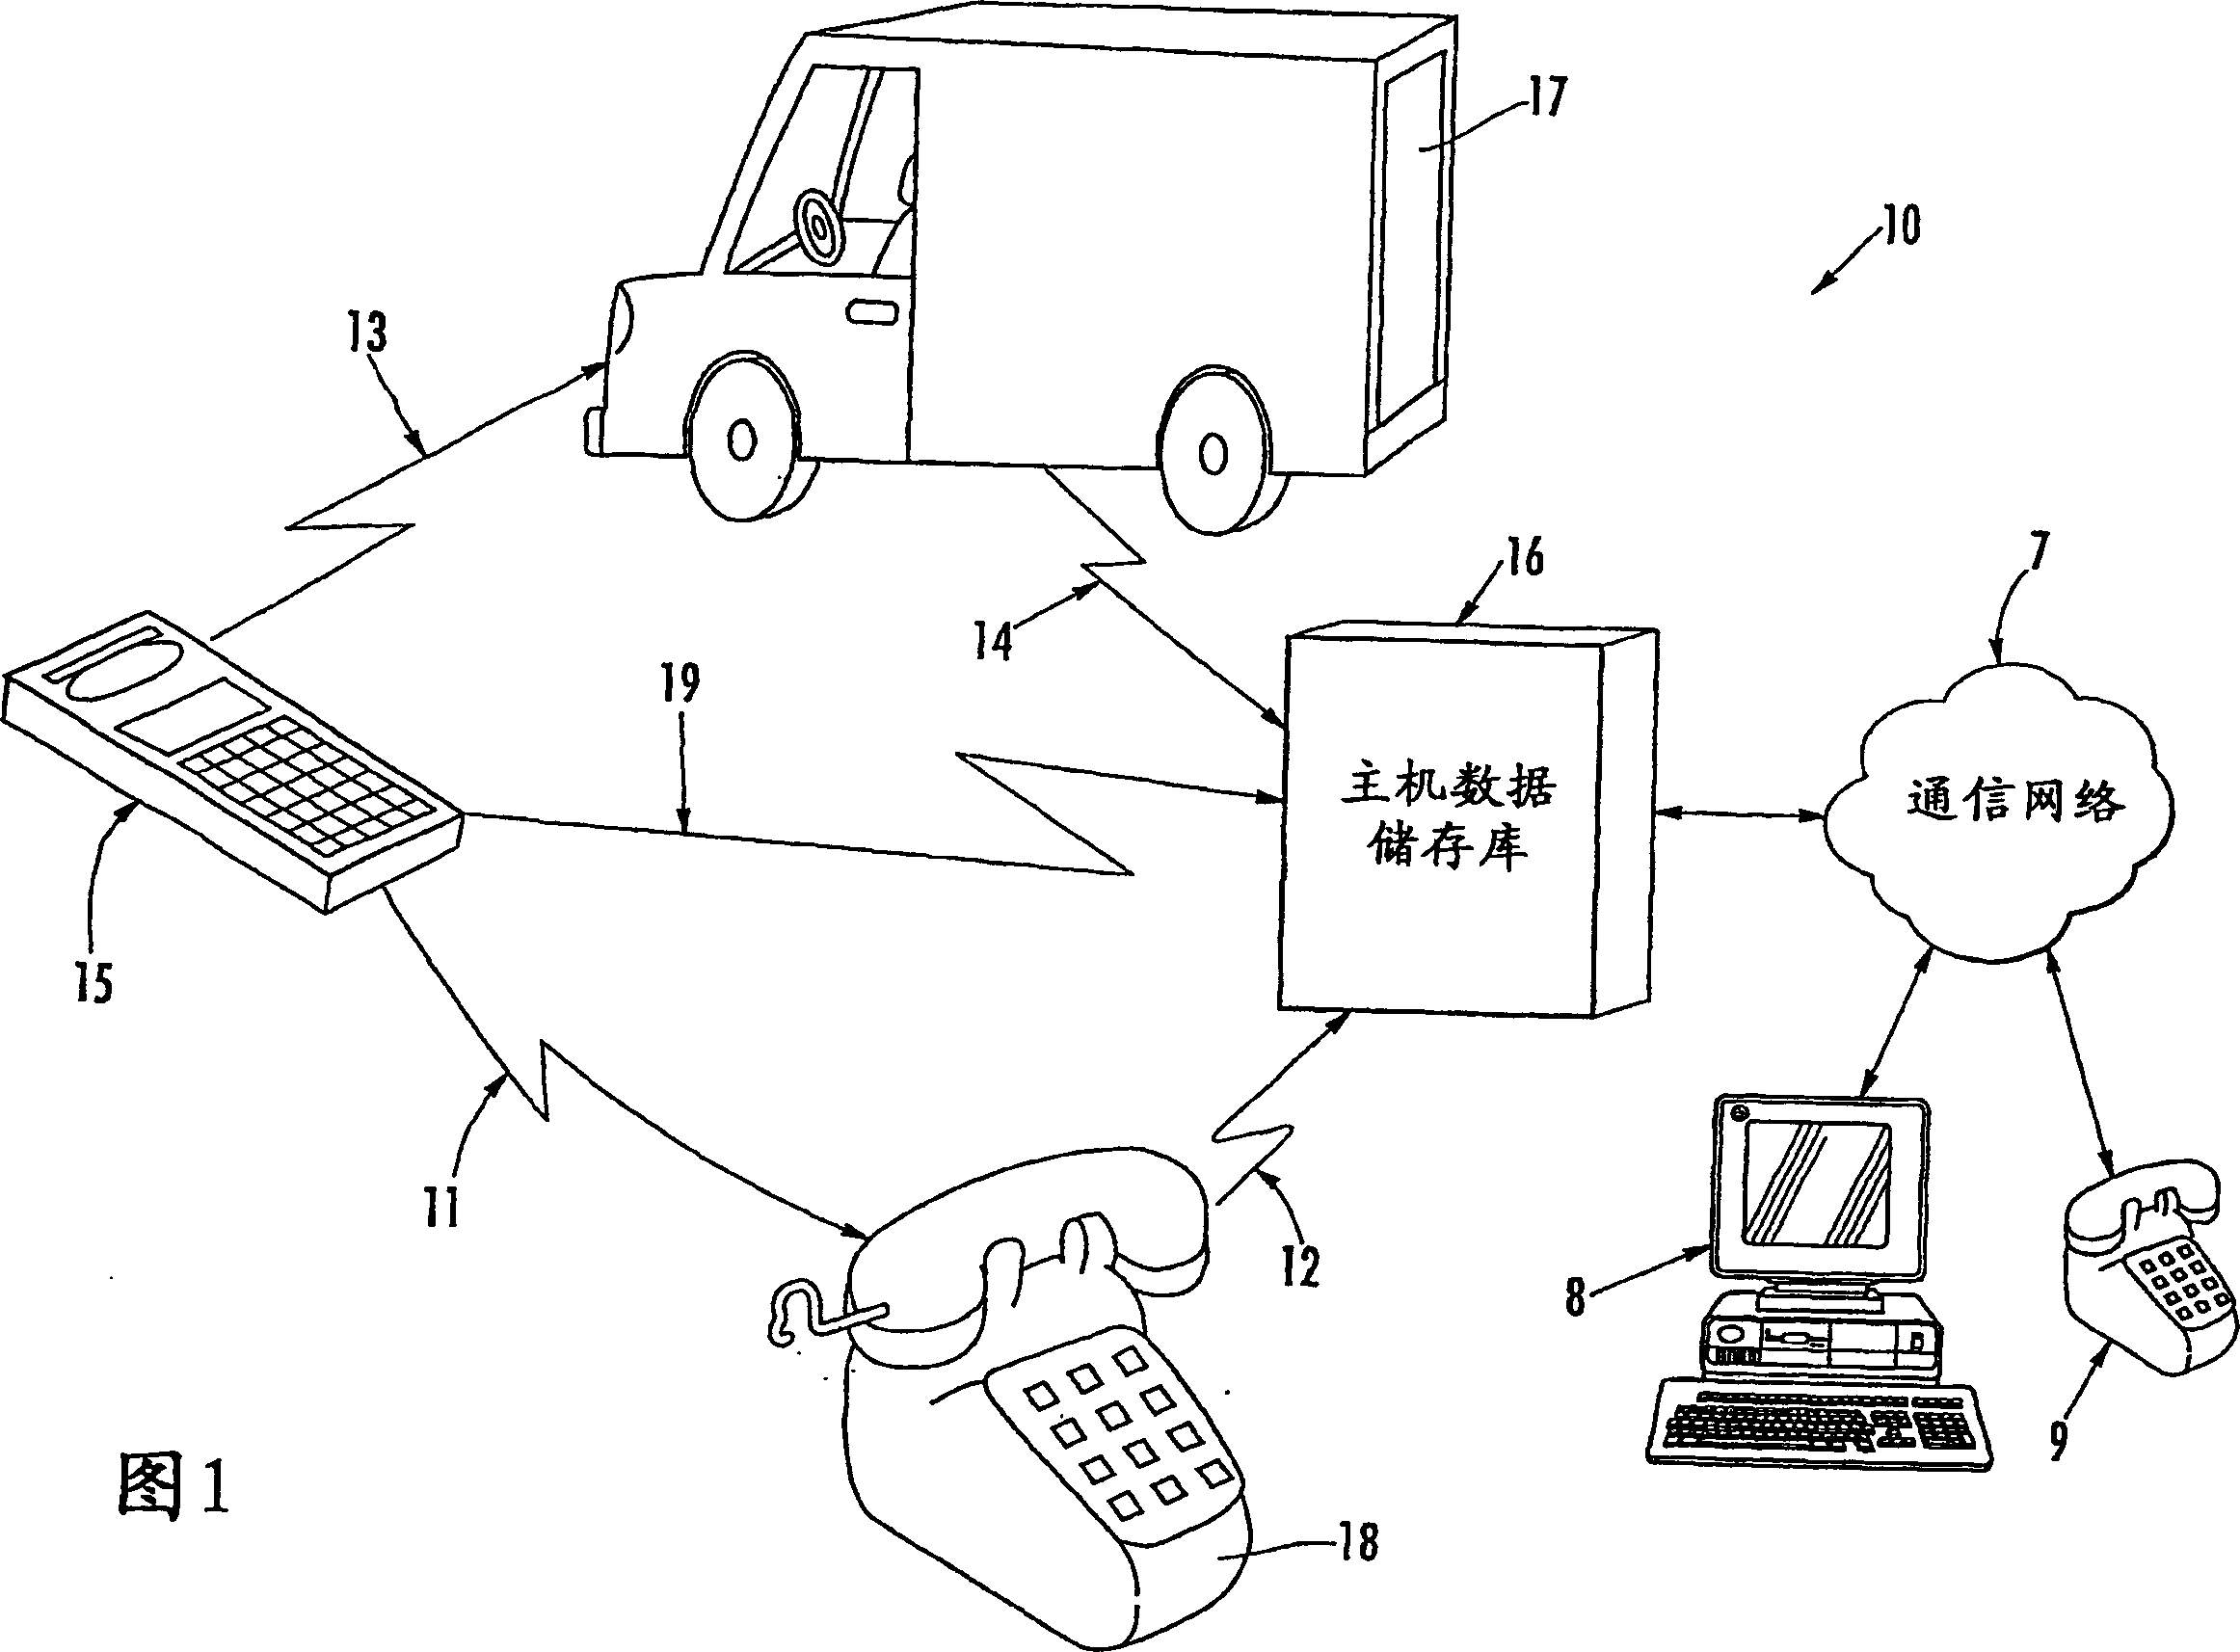 Systems, methods and apparatus for real-time tracking of packages